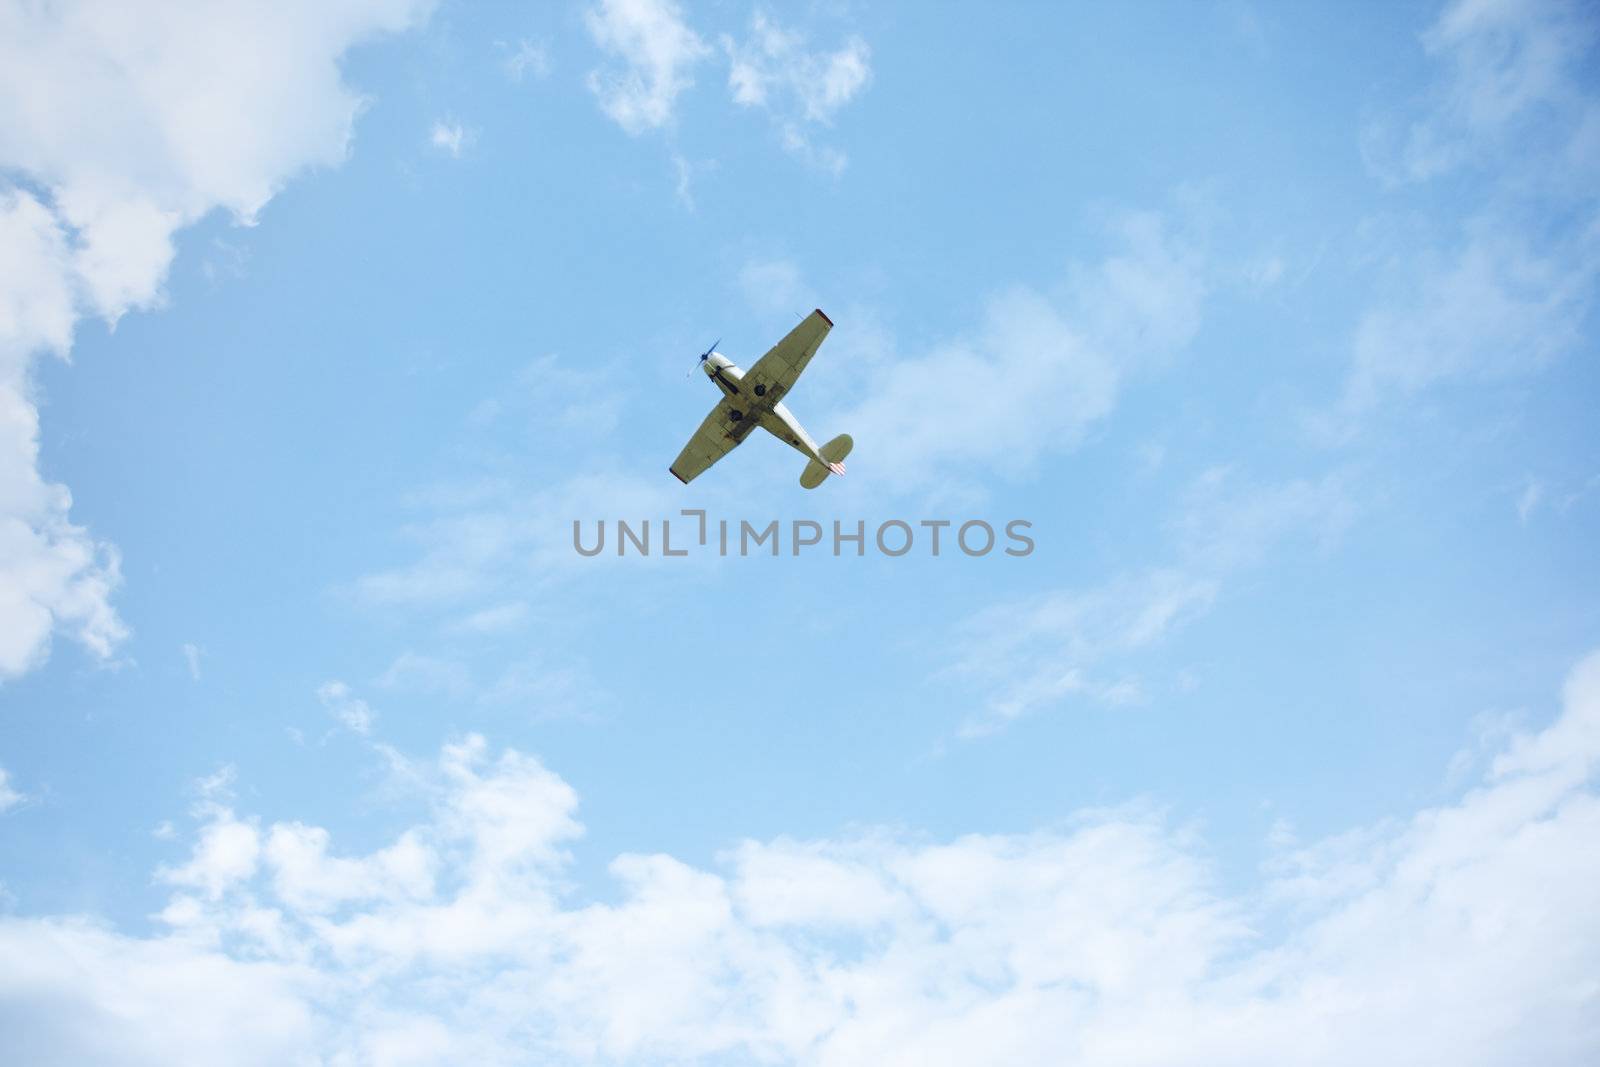 Airplane flies in the cloudy sky. Natural light and colors